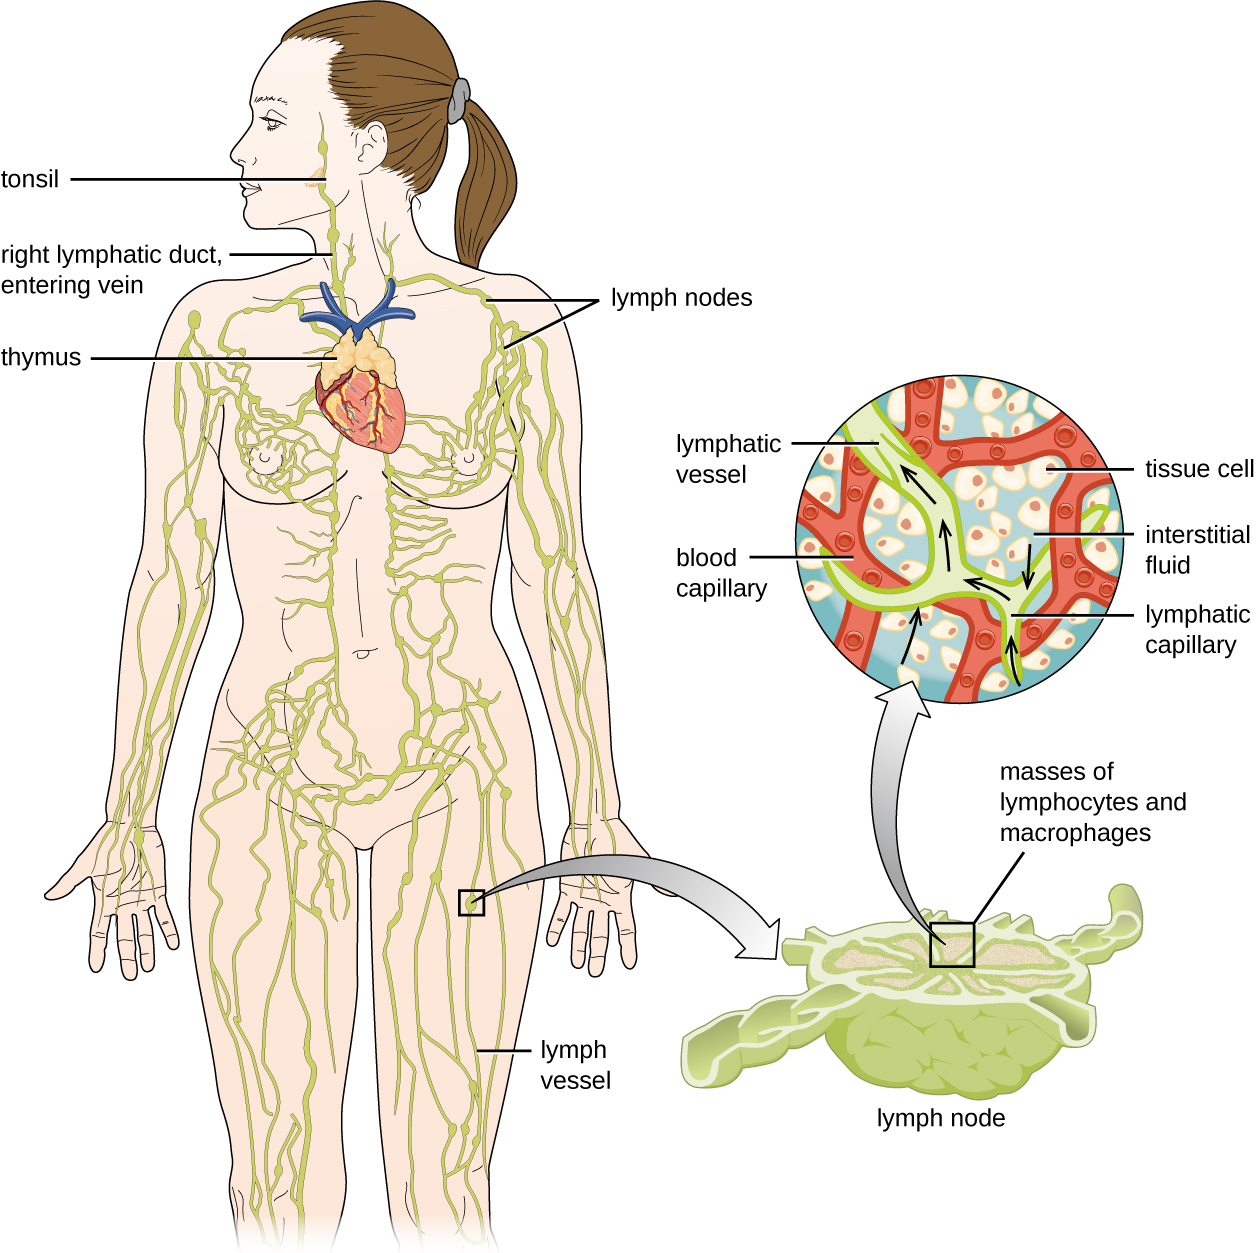 Diagram of the lymphatic system. Lymph notes are swellings on tubes (called lymph vessels) that travel throughout the body. The right lymphatic duct and entering vein are in the neck. A tonsil is a swelling on the lymph vessel in the mouth. The thymus is a lumpy structure on the heart. A close-up of a lymph node shows a roundish structure with many tubes attached to it. The central area has a box labeled “masses of lymphocytes and macrophages”. A close-up of this area shows tissue cells in the background with a blood capillary network. Lymph vessels run between the  blood capillary network. Lymphatic capillaries are the ends of the lymph vessels. Fluid from around the cells (called interstitial fluid) enters the lymphatic capillaries and travels through the lymphatic vessels.